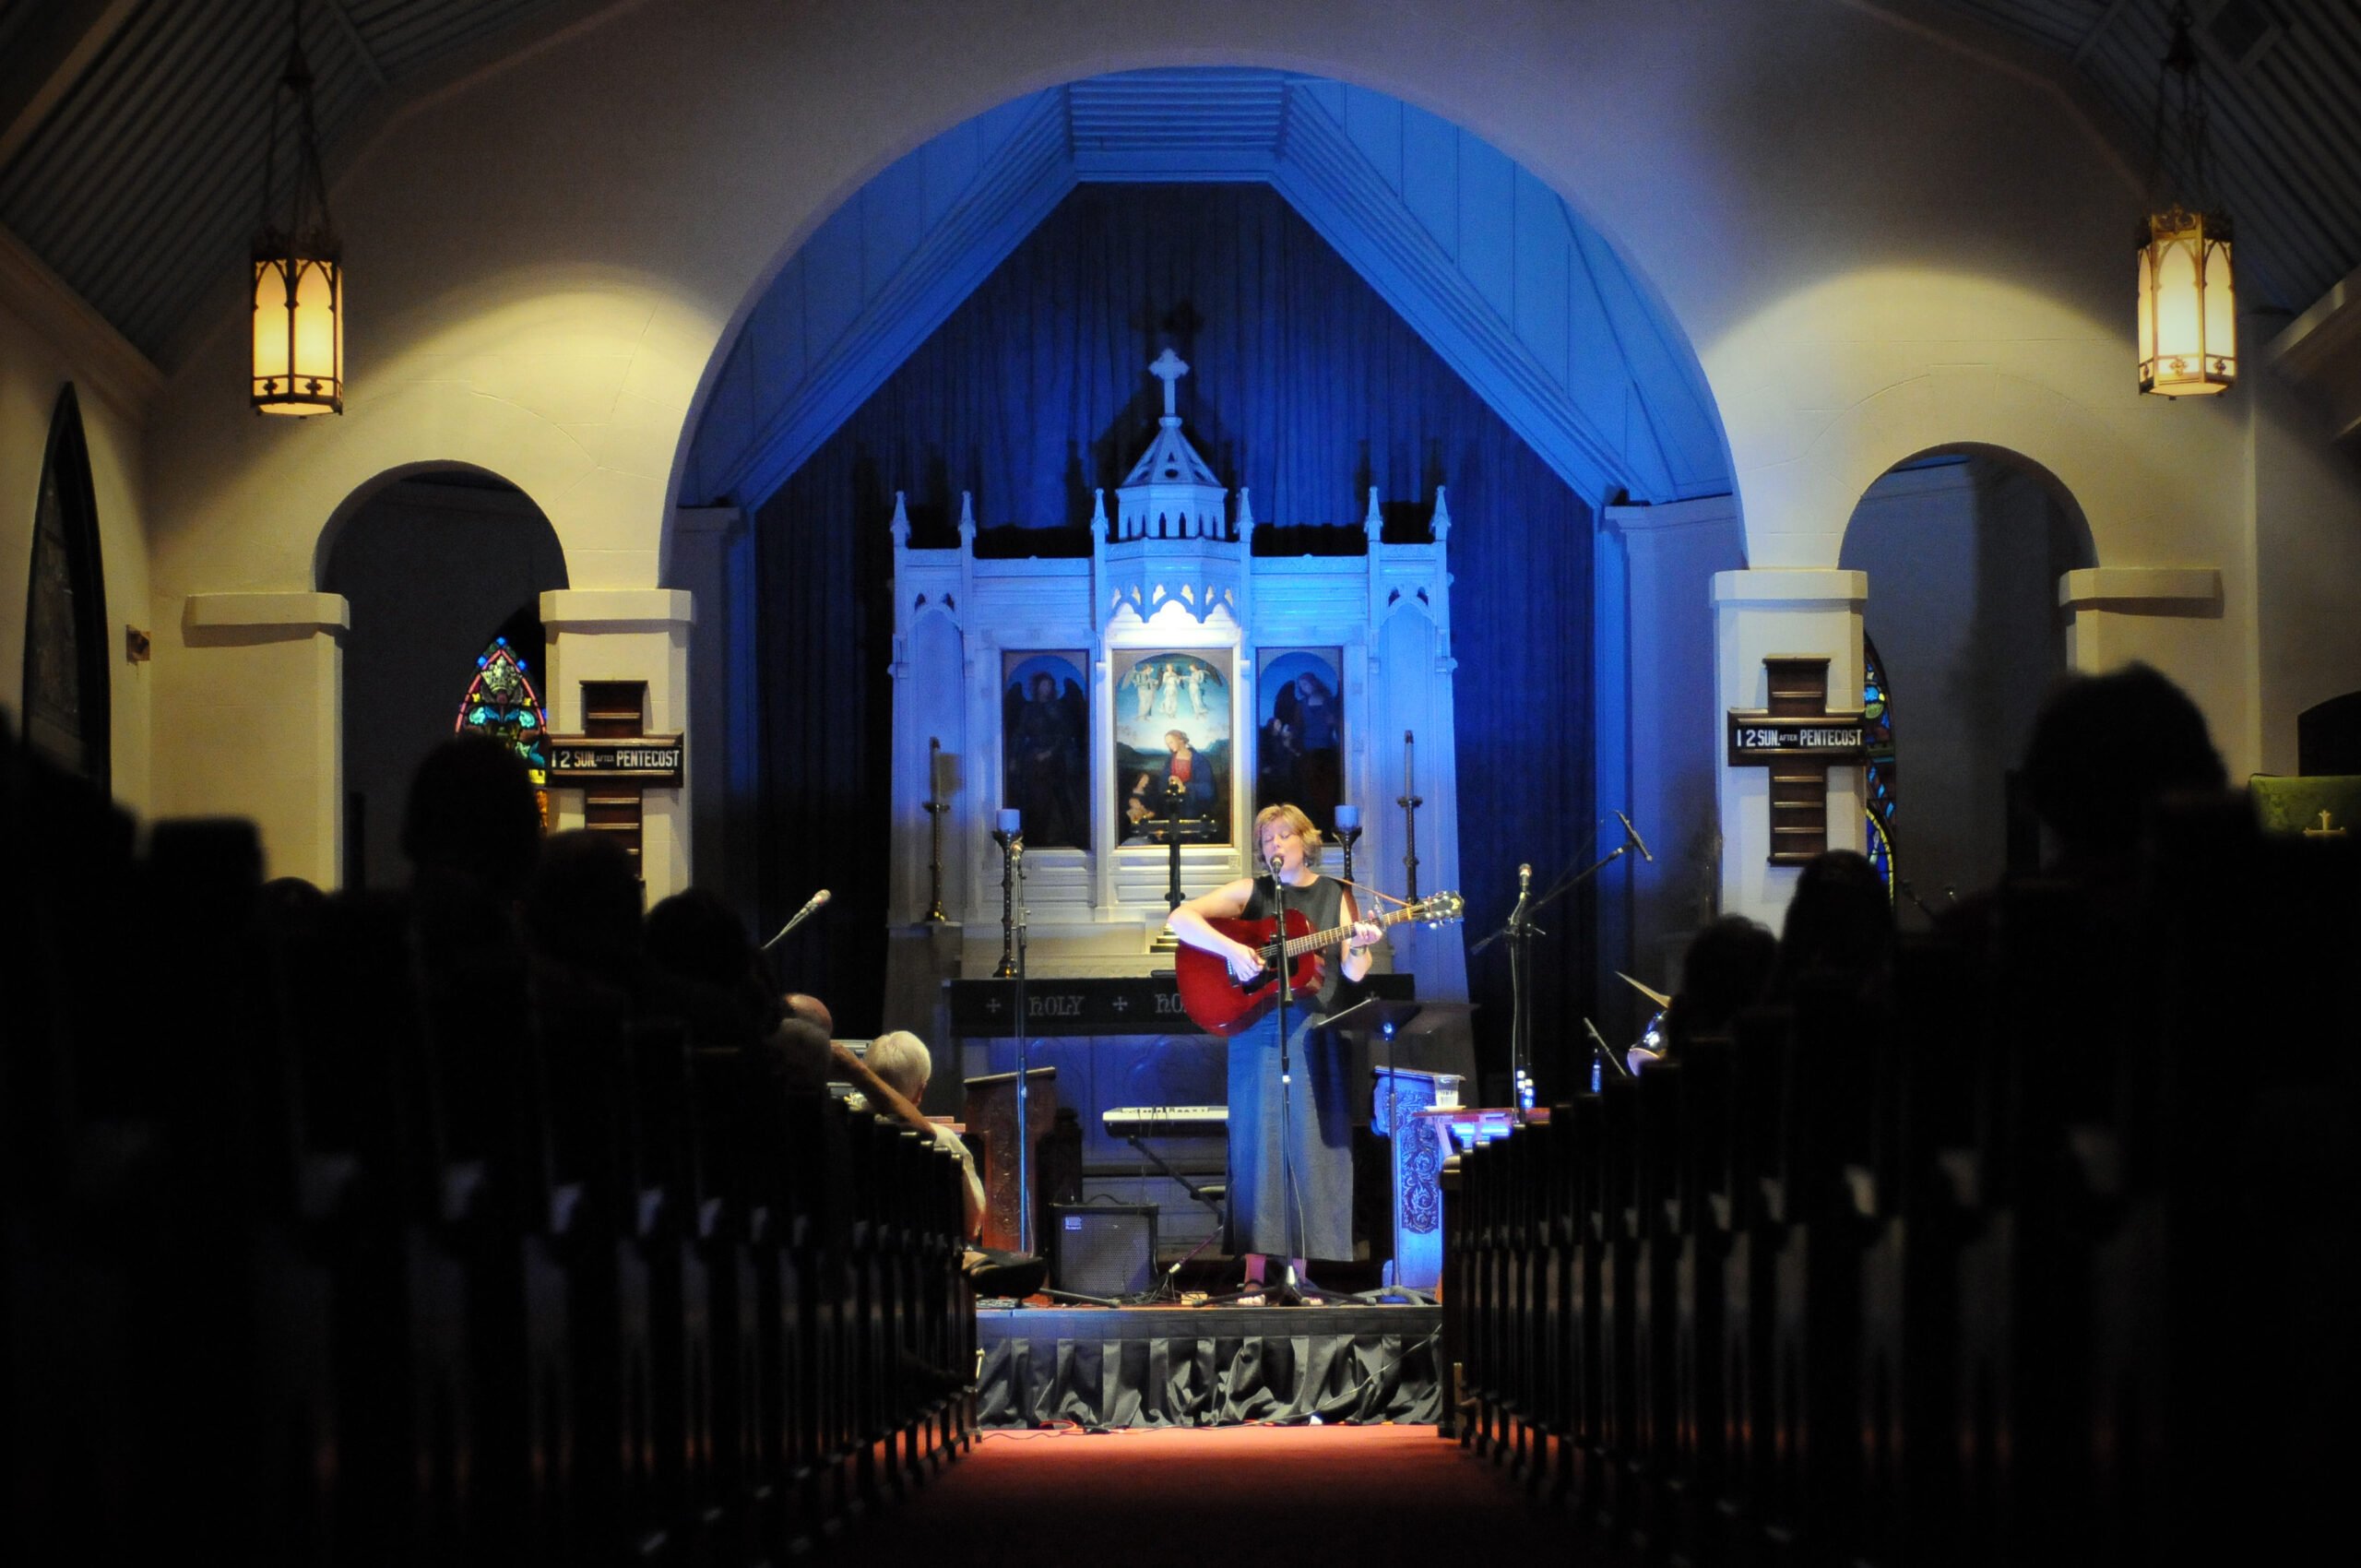 A performer plays music on the church Sanctuary, turned into a makeshift stage. The photo has a church-like atmosphere, with dimmed lights, viewers seated on pews and the altar behind the musicians.